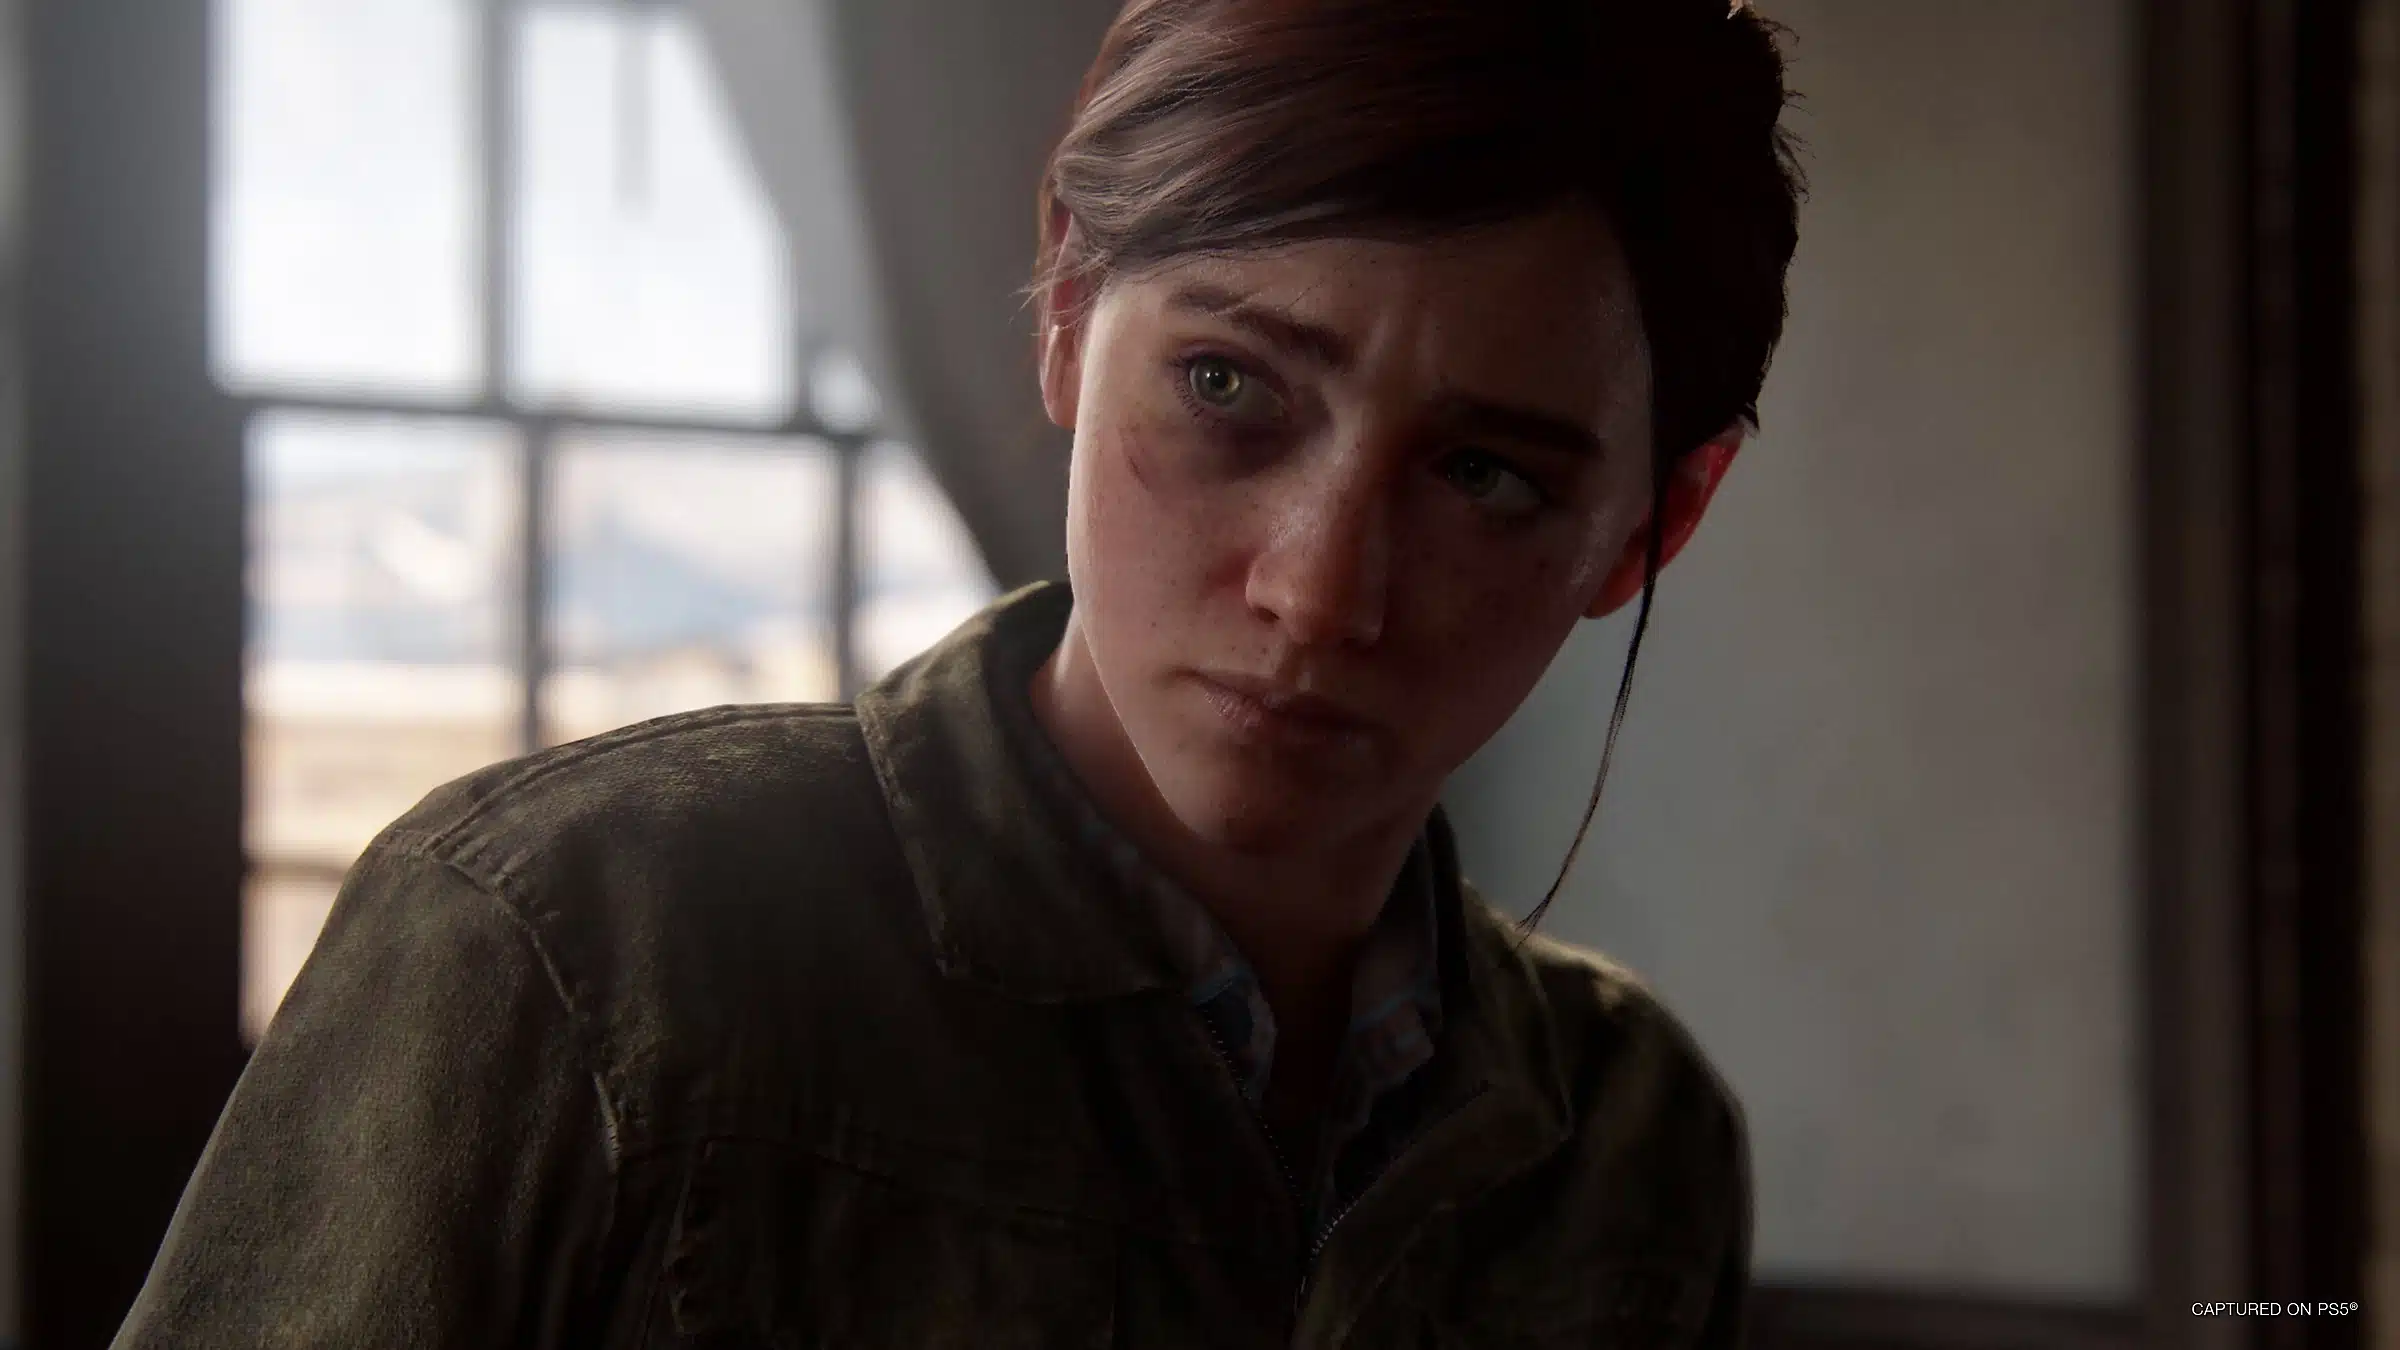 The Last of Us Part 1 v1.0.1.6 Patch deployed to address PC performance  issues -  News